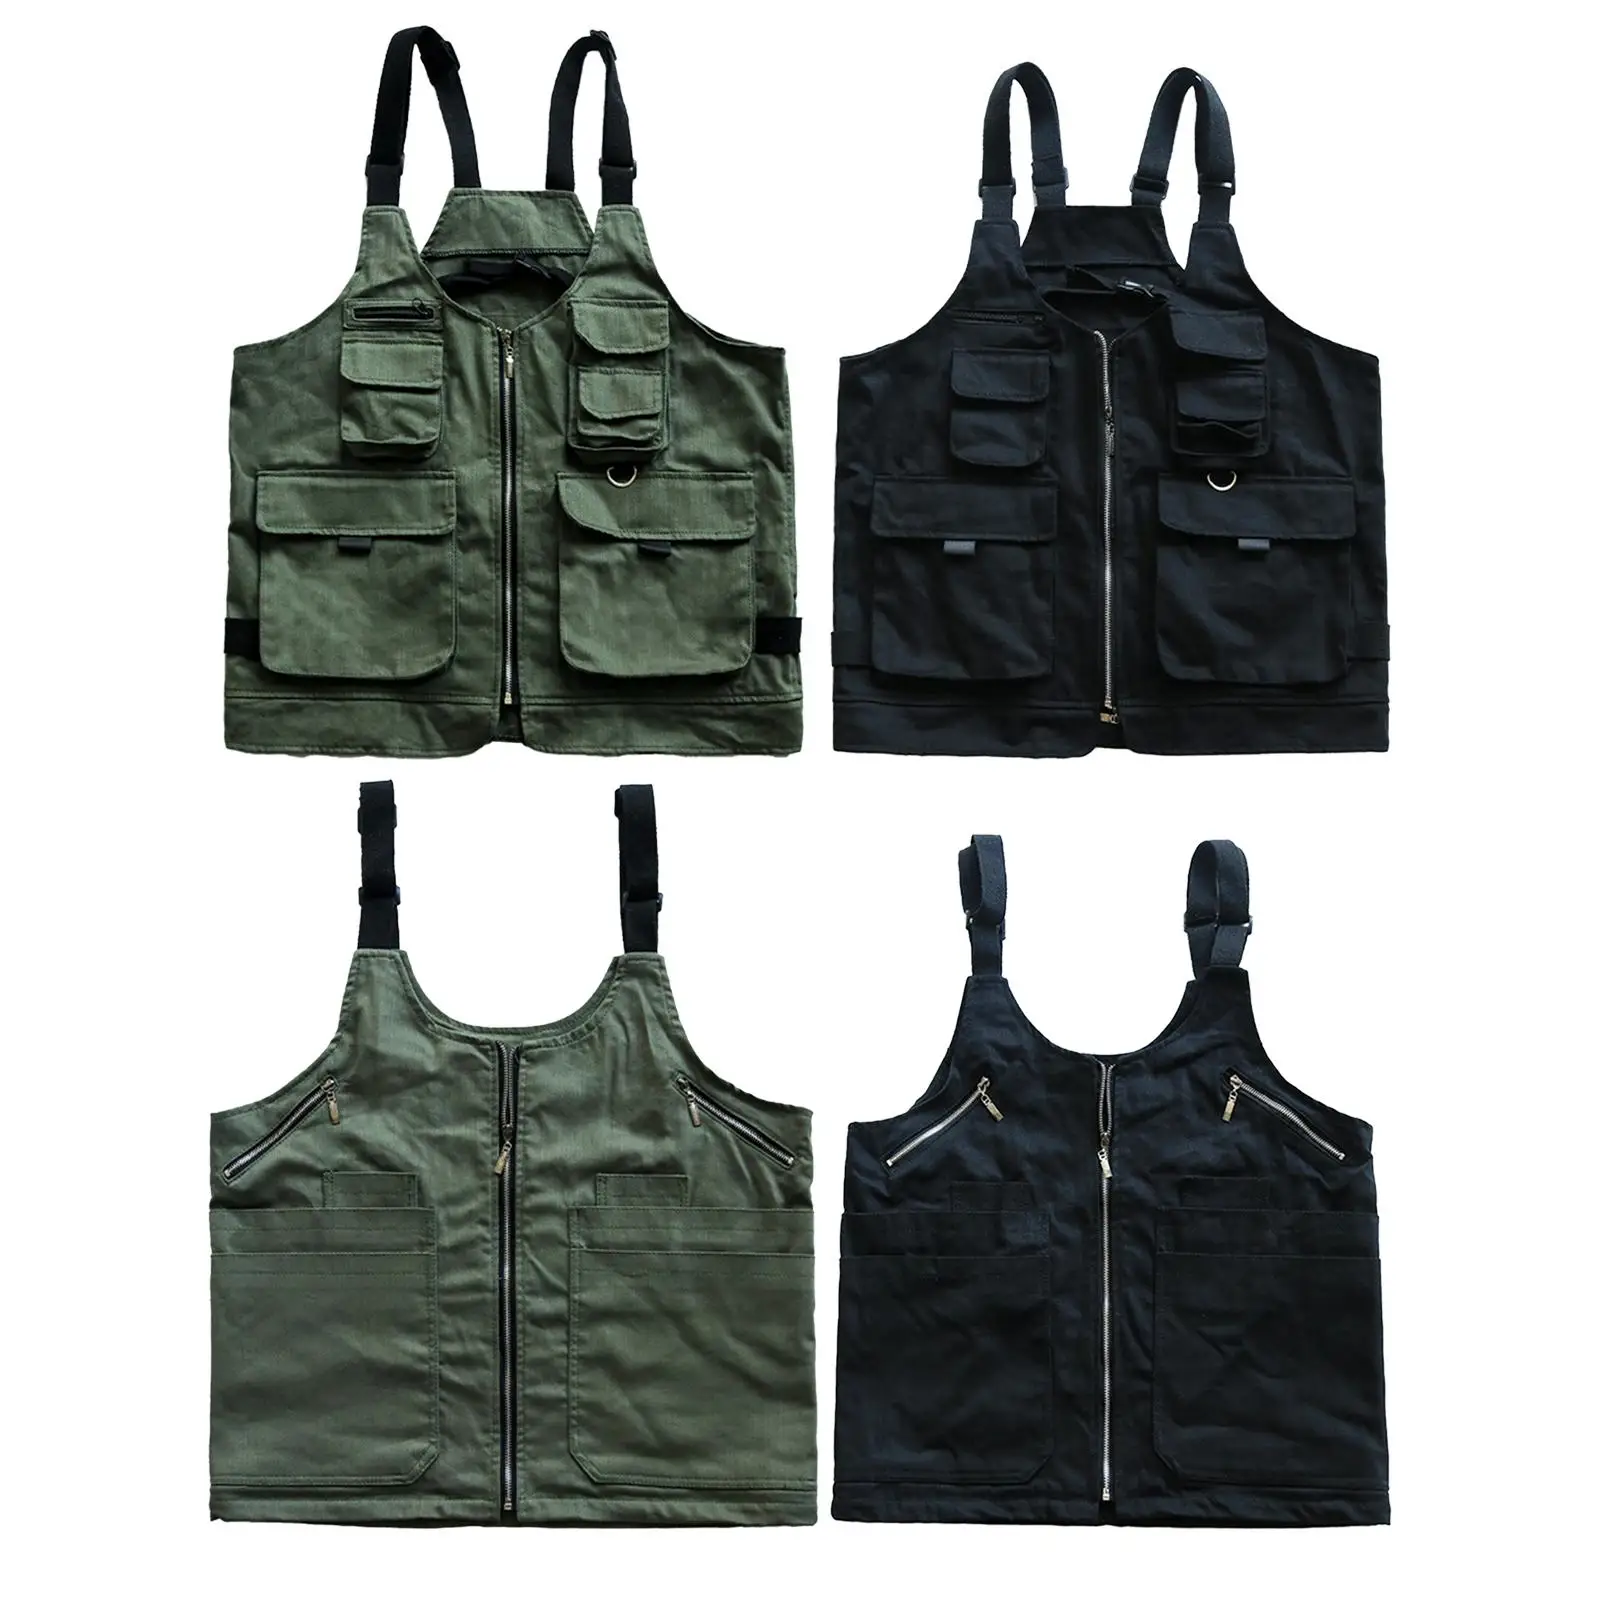 Barbecue Apron Outdoor Camping Vest Storage Bag Apron for Photography Backyard Picnics